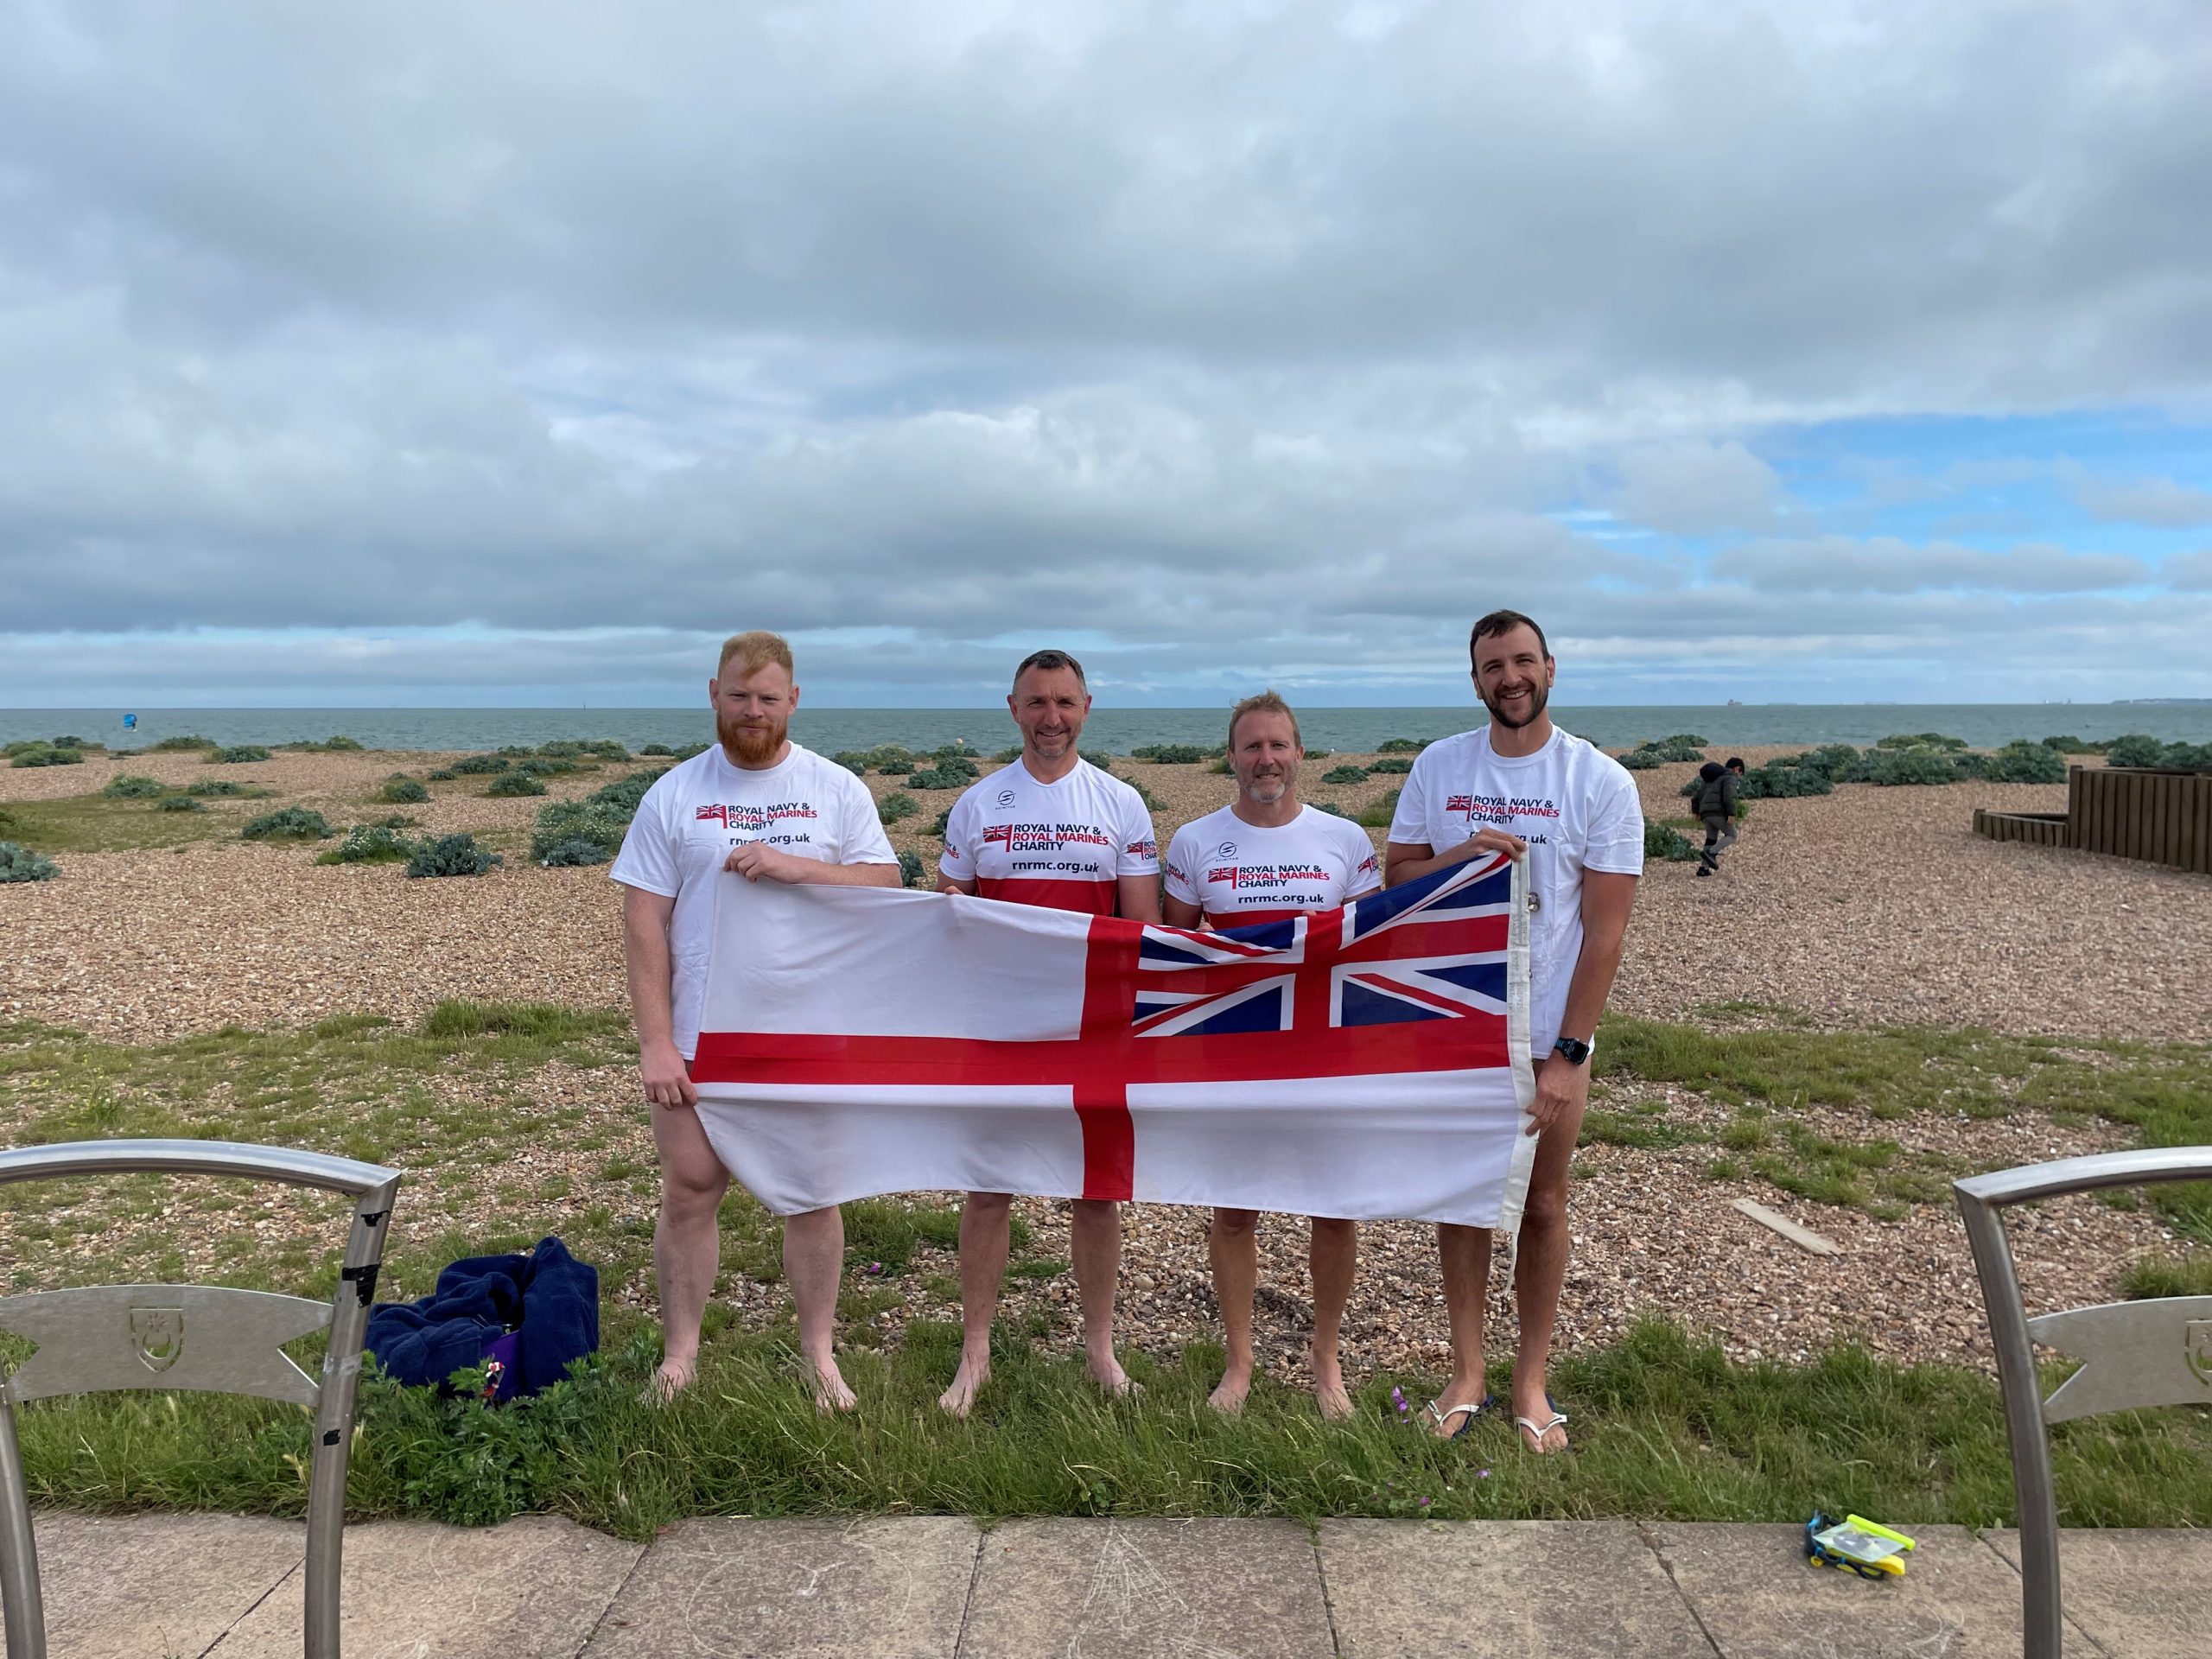 Royal Navy Submariners Swim English Channel Fundraising For Mental Health Charities